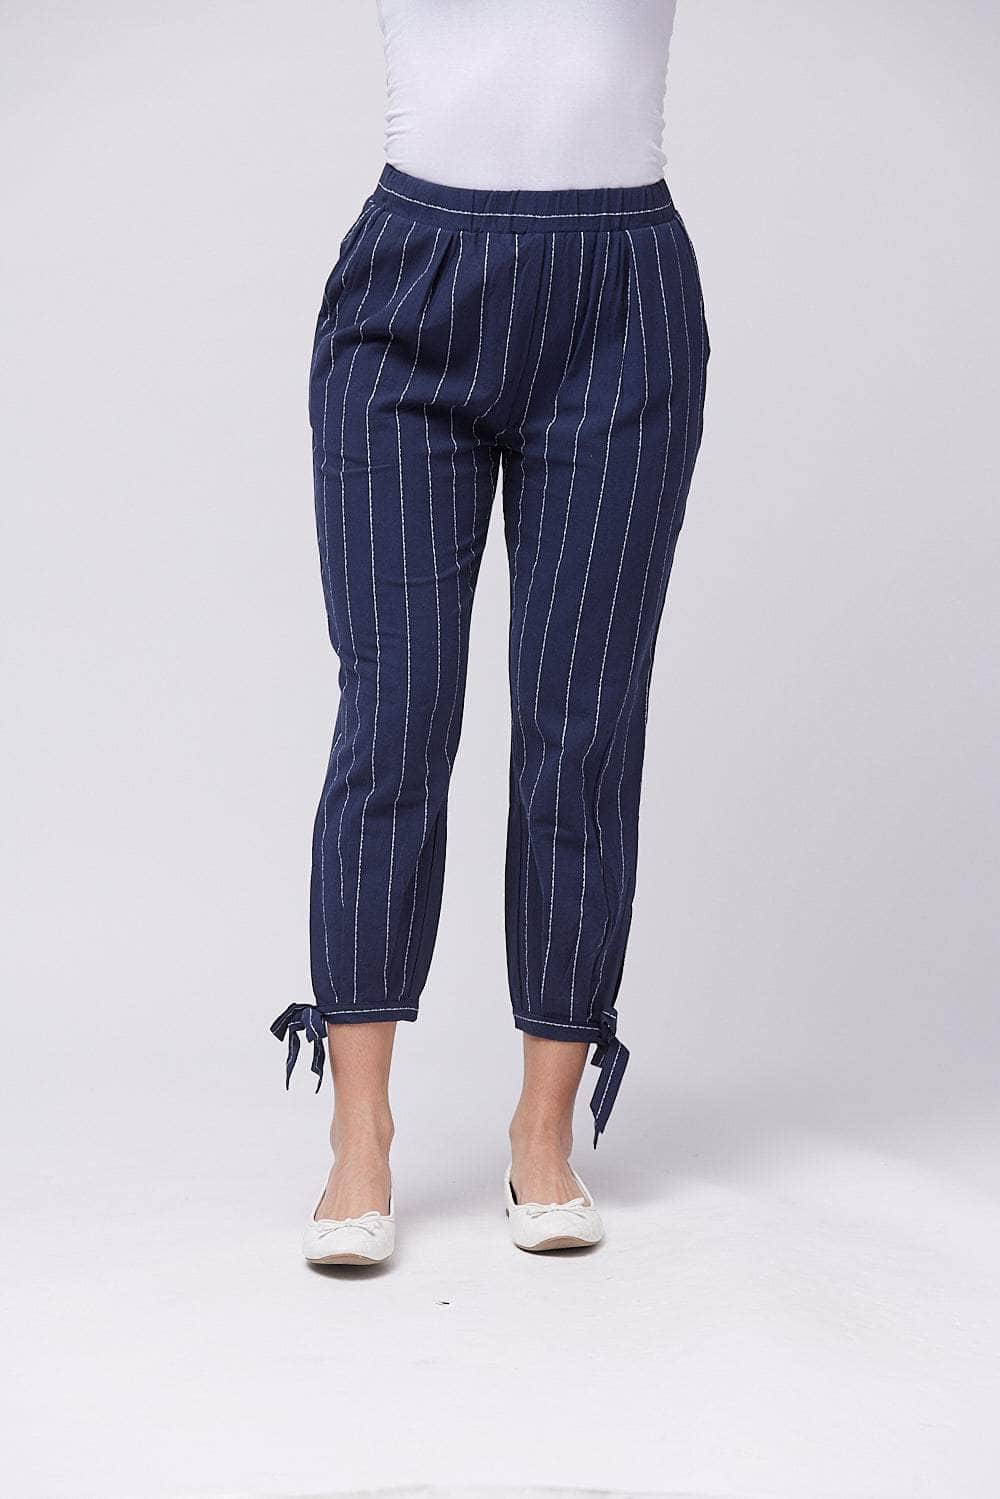 G4 Trousers Navy / UK: 12 - EU: 38 - US: S Saloos Three-Quarter Pinstripe Trousers with Pockets